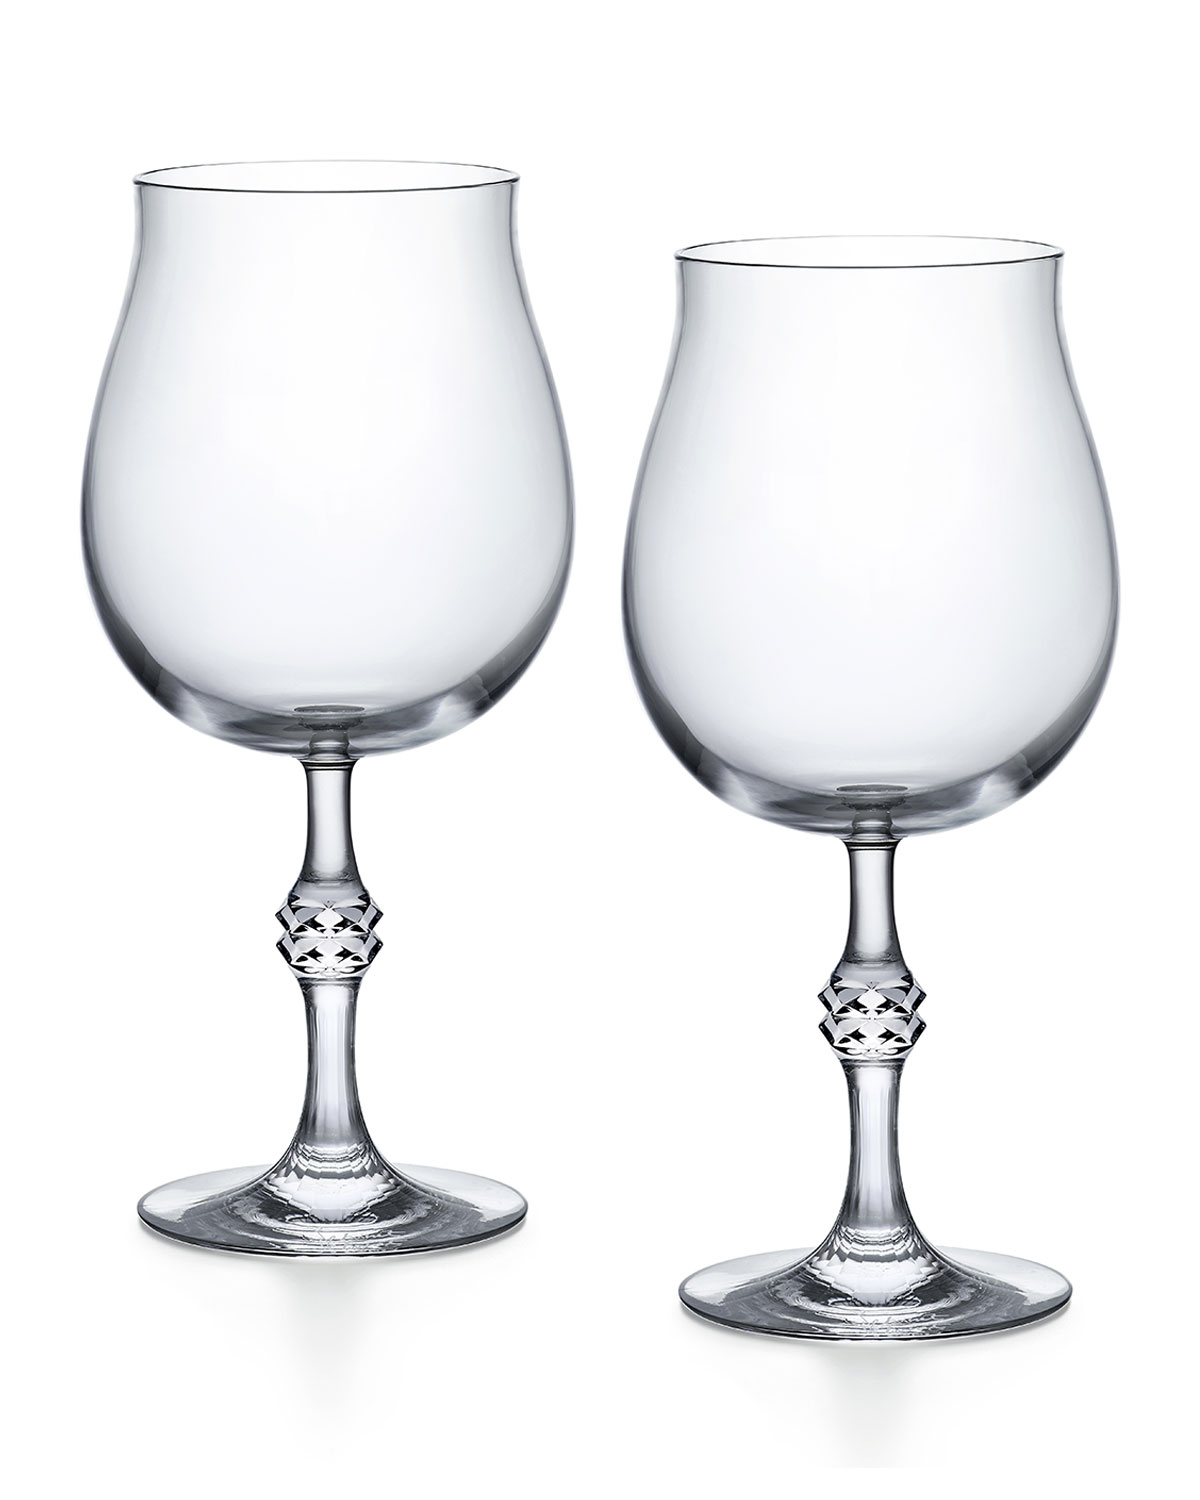 JCB Baccarat Passion Collection Wine Glass (set of 2) - click image for full description